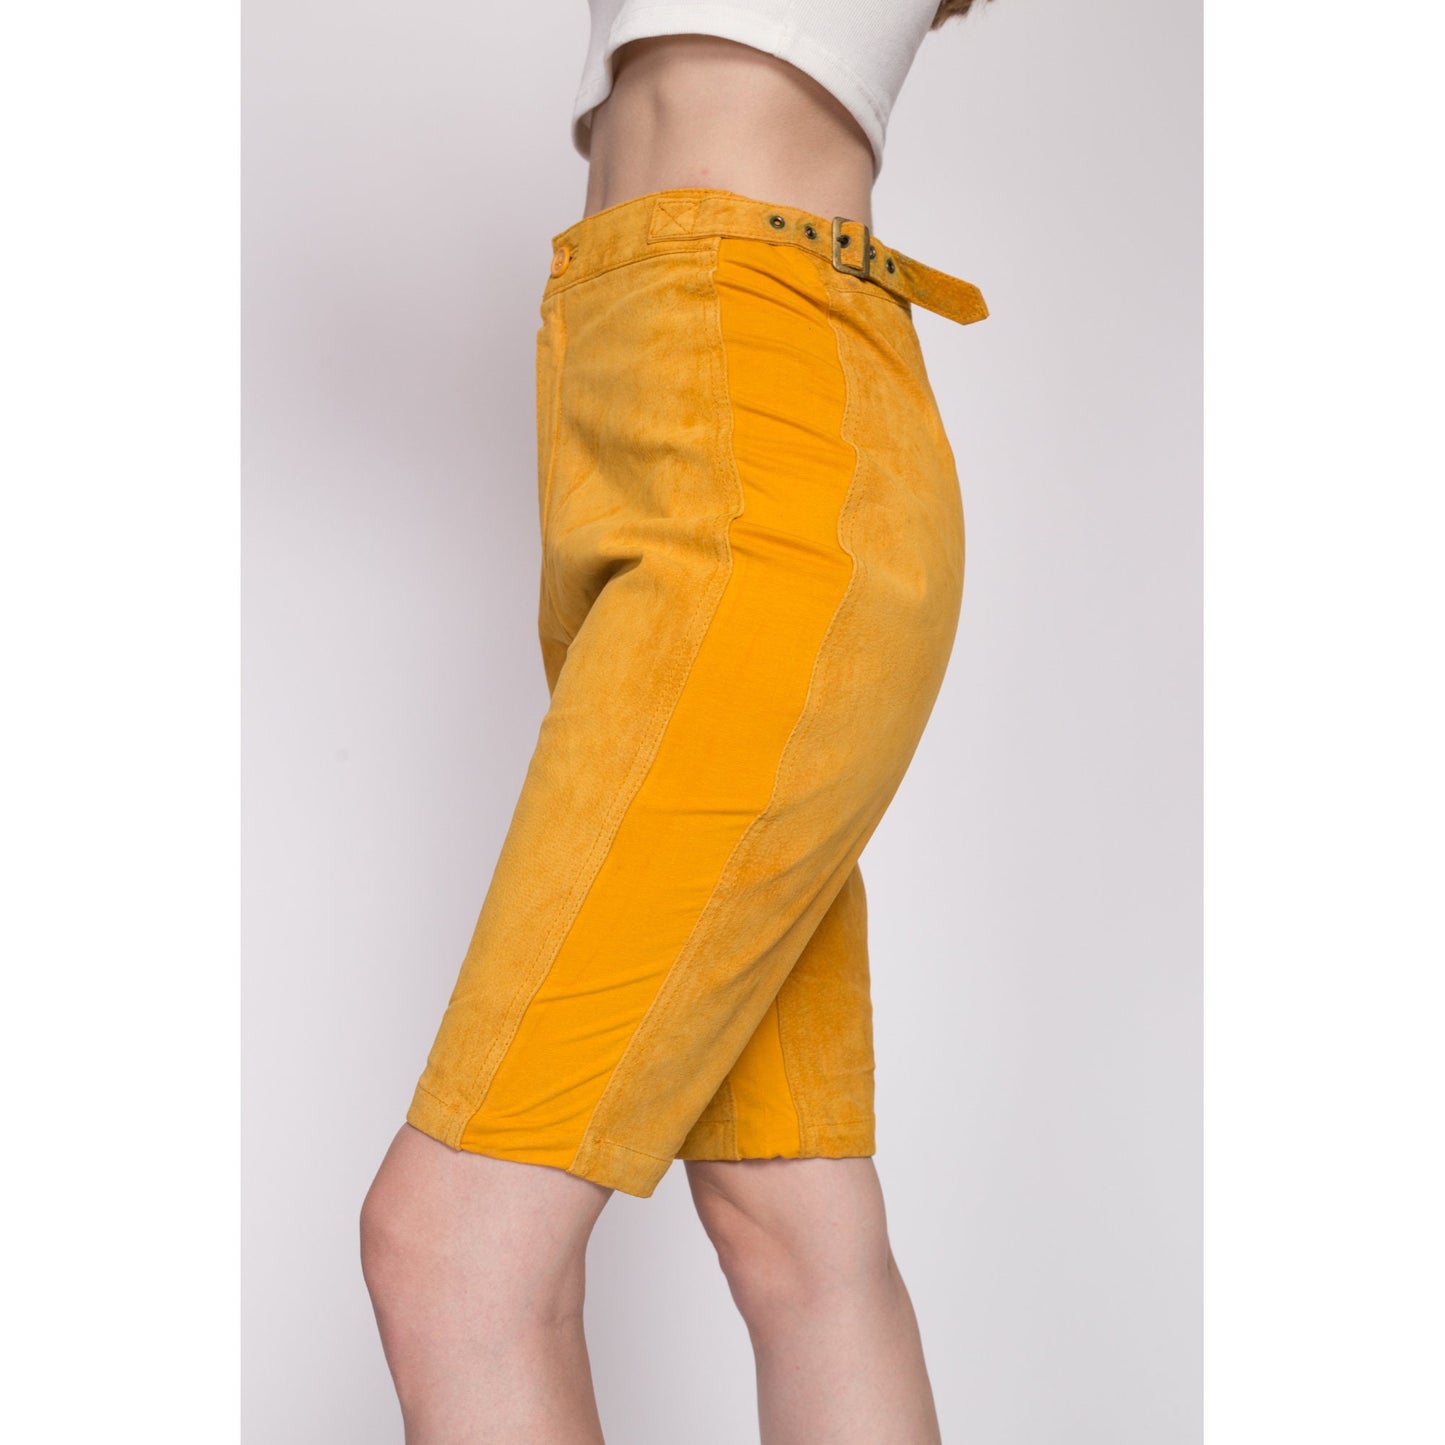 M| Vintage Yellow Suede Biker Shorts, Deadstock - Medium | 80s 90s High Waisted Adjustable Leather Motorcycle Riding Gear